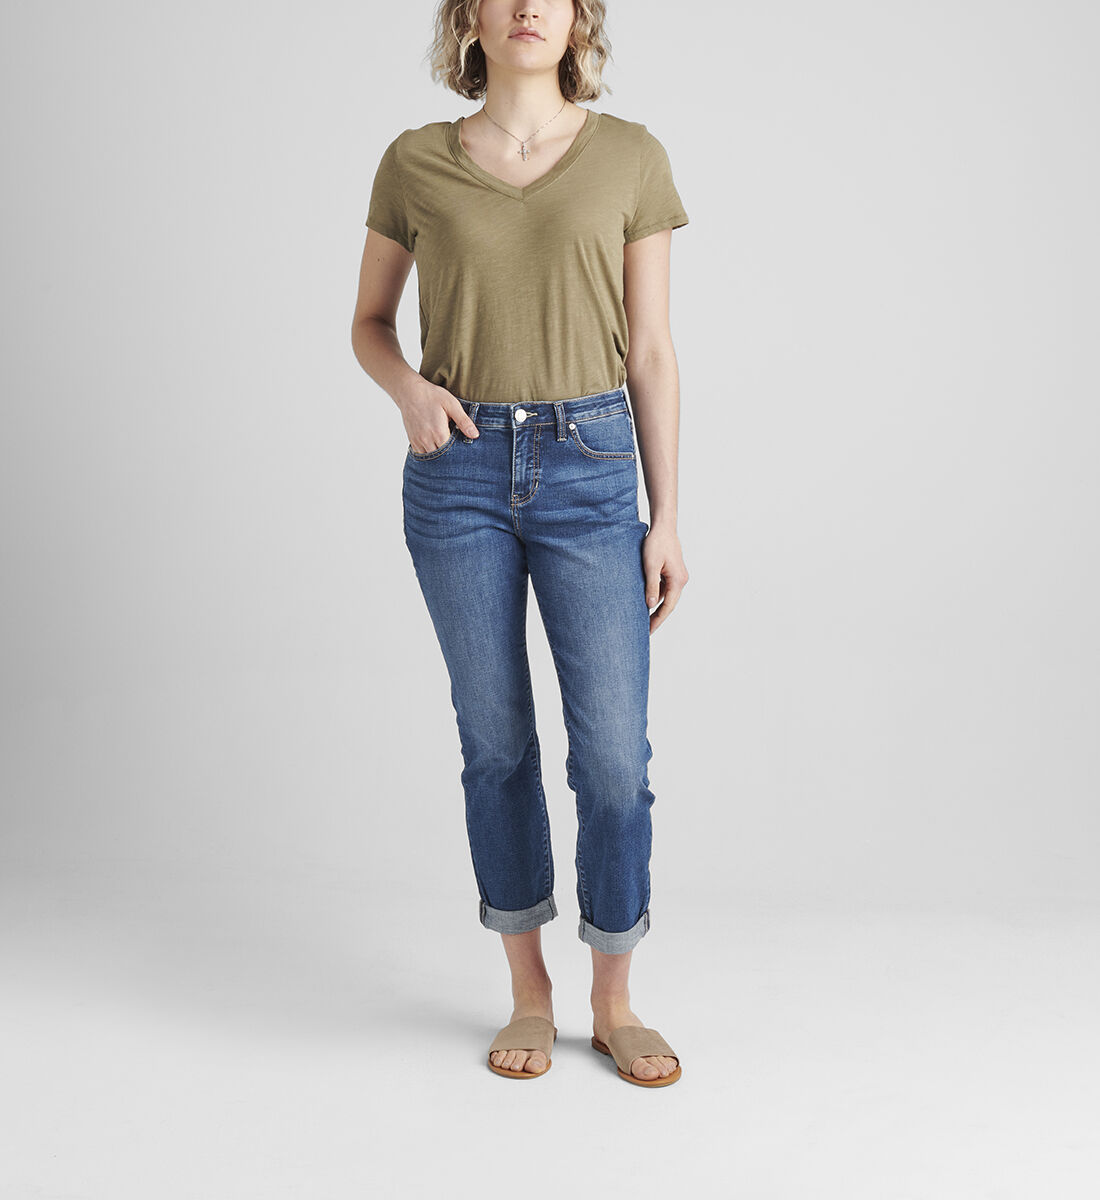 Carter Mid Rise Girlfriend Jeans Front